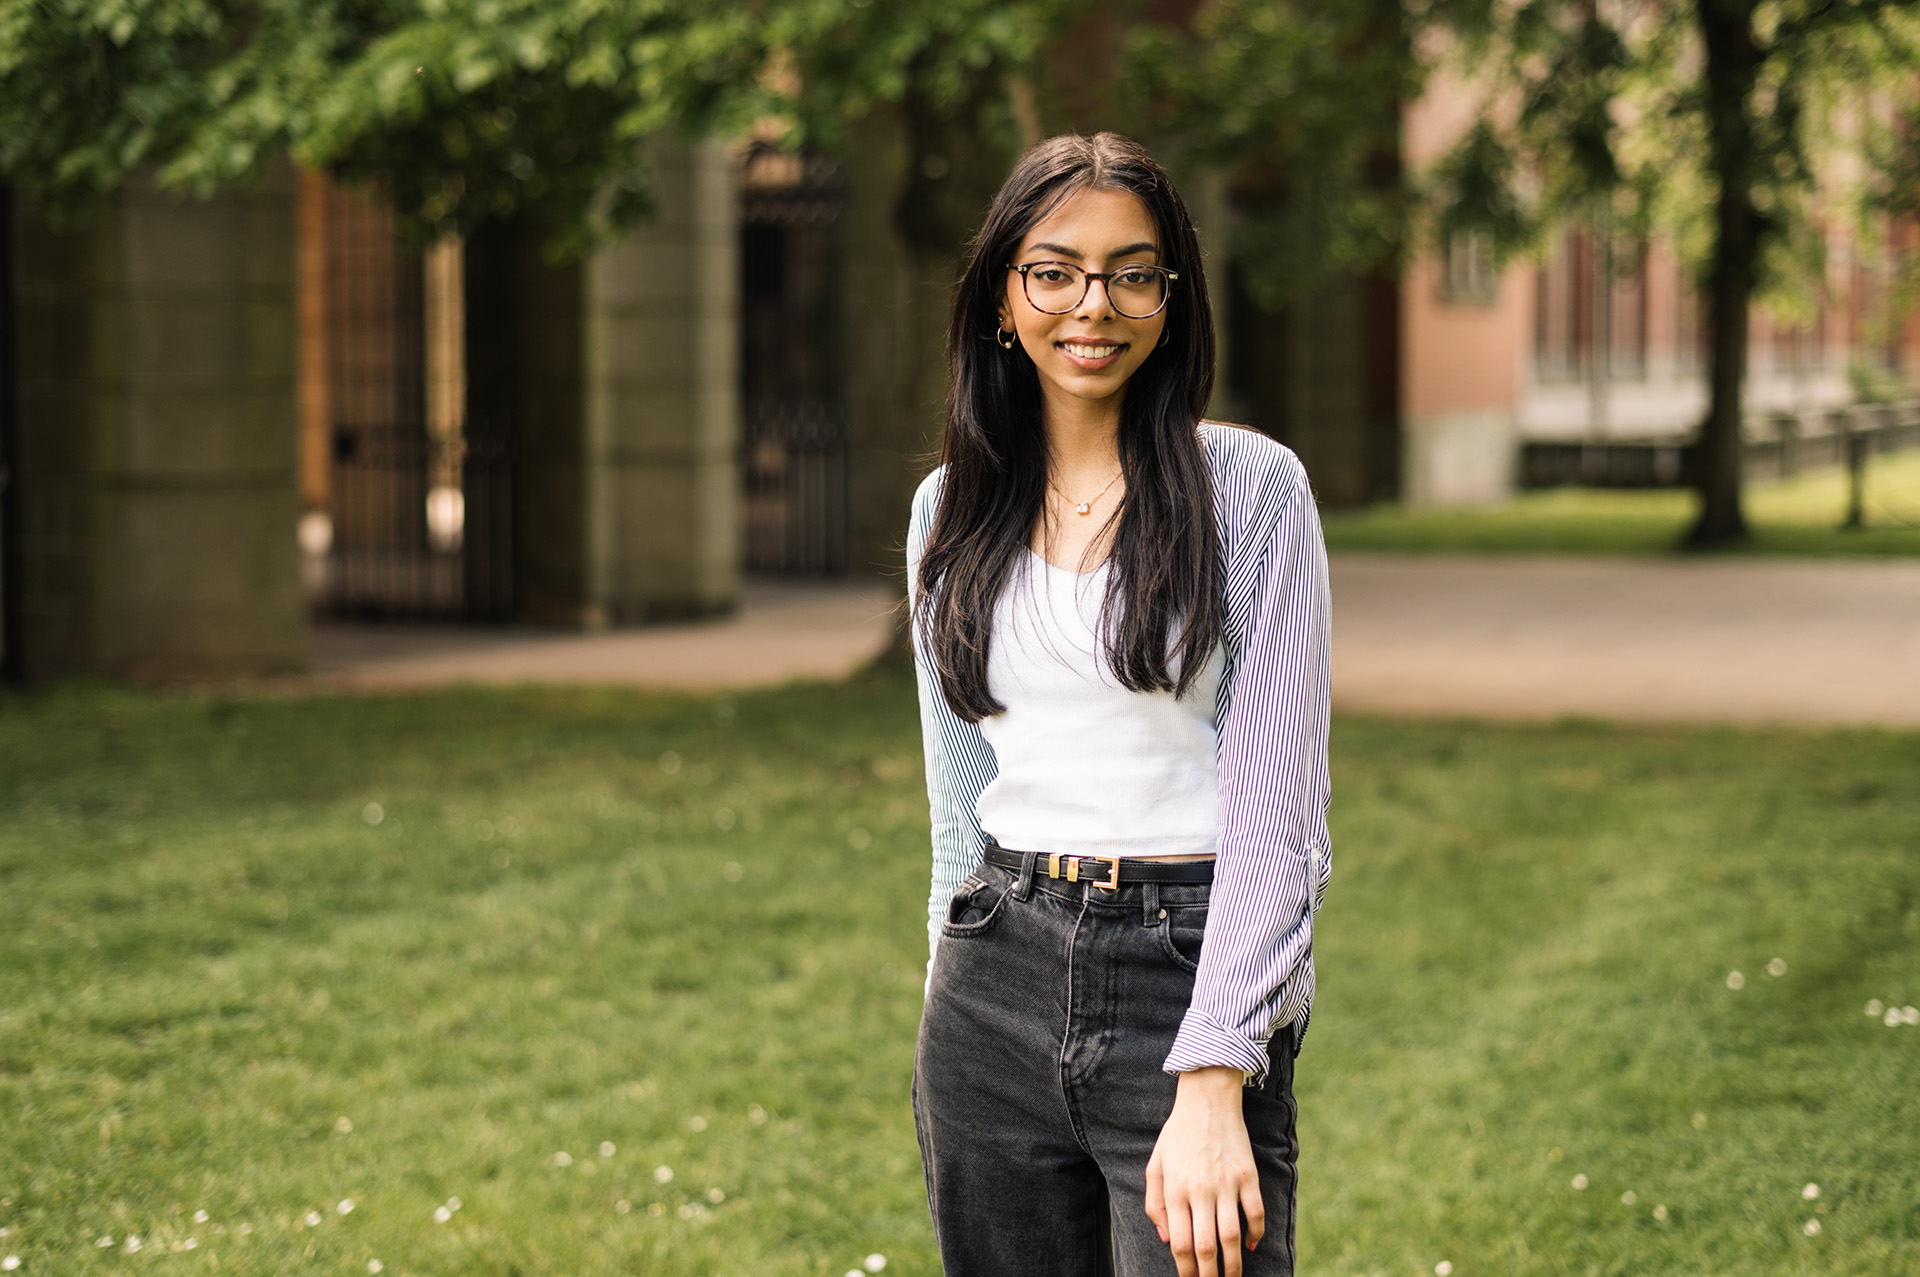 Reema, who studies Law with French law, standing in the University of Birmingham's green campus